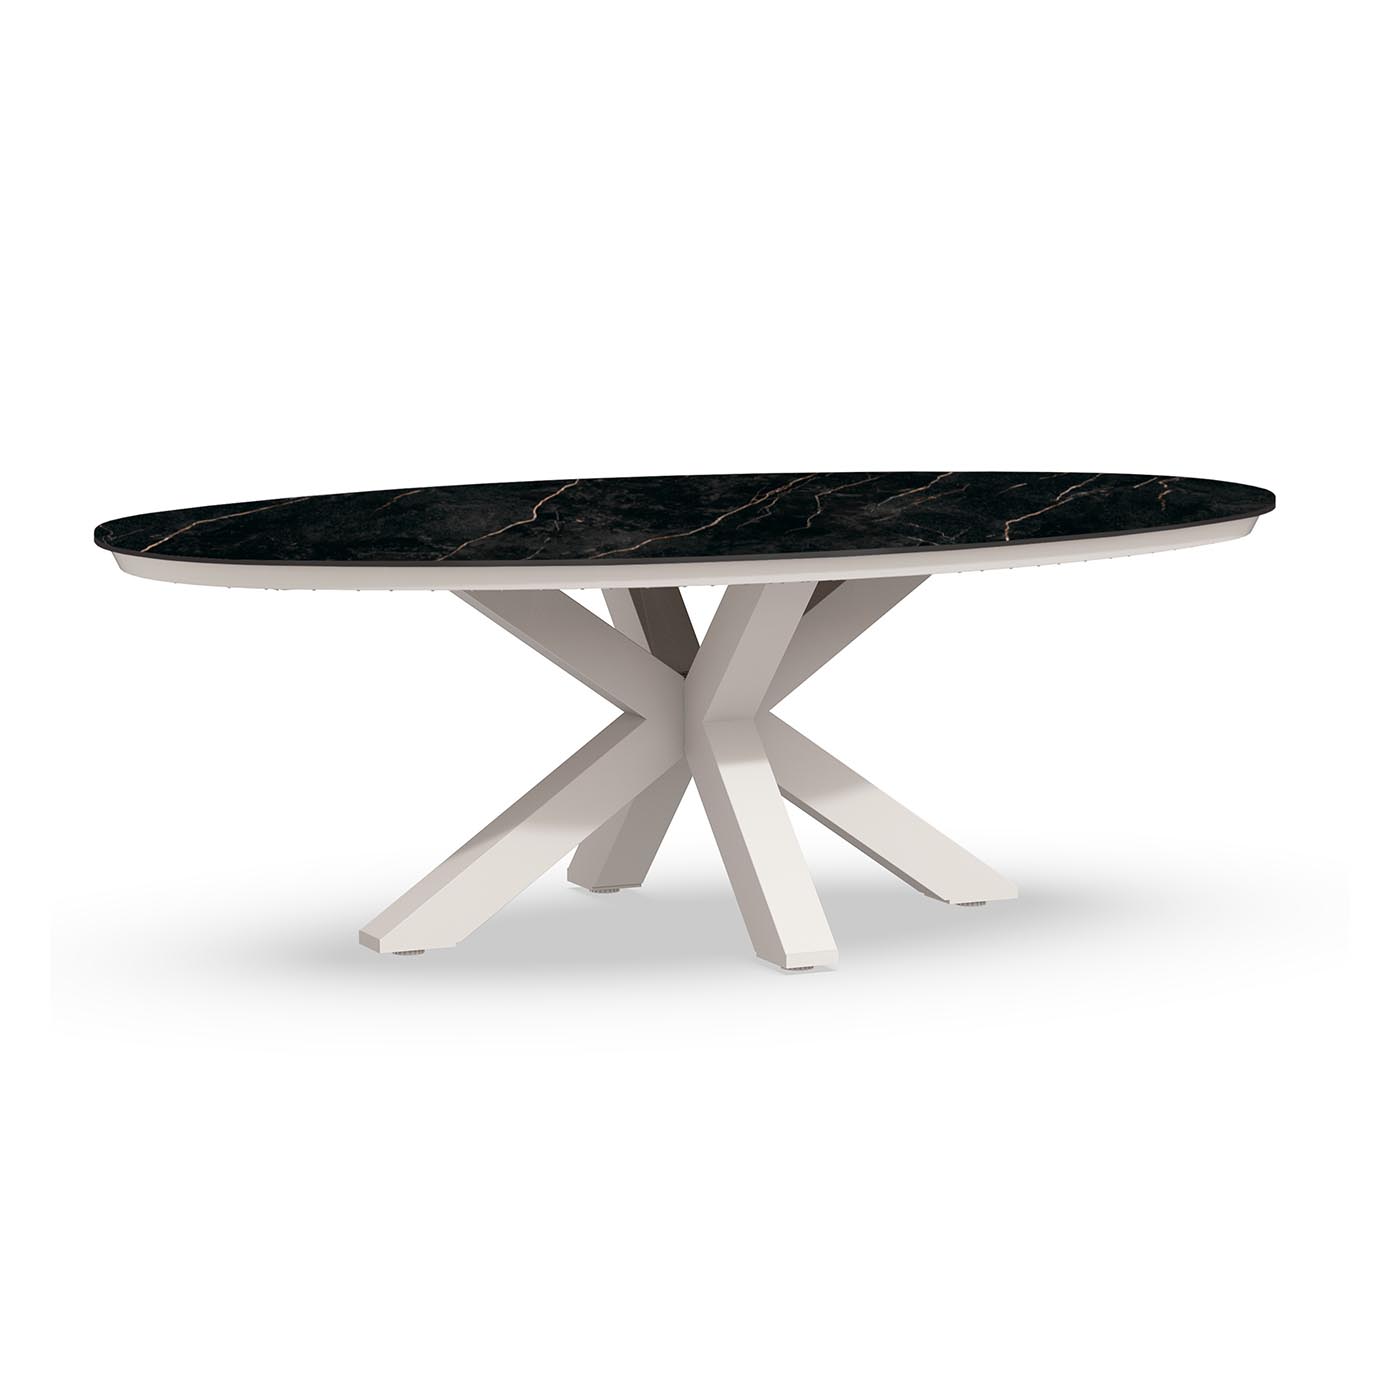 Oblong Dining Table Trespa Marble 220 x 130 cm Creme White